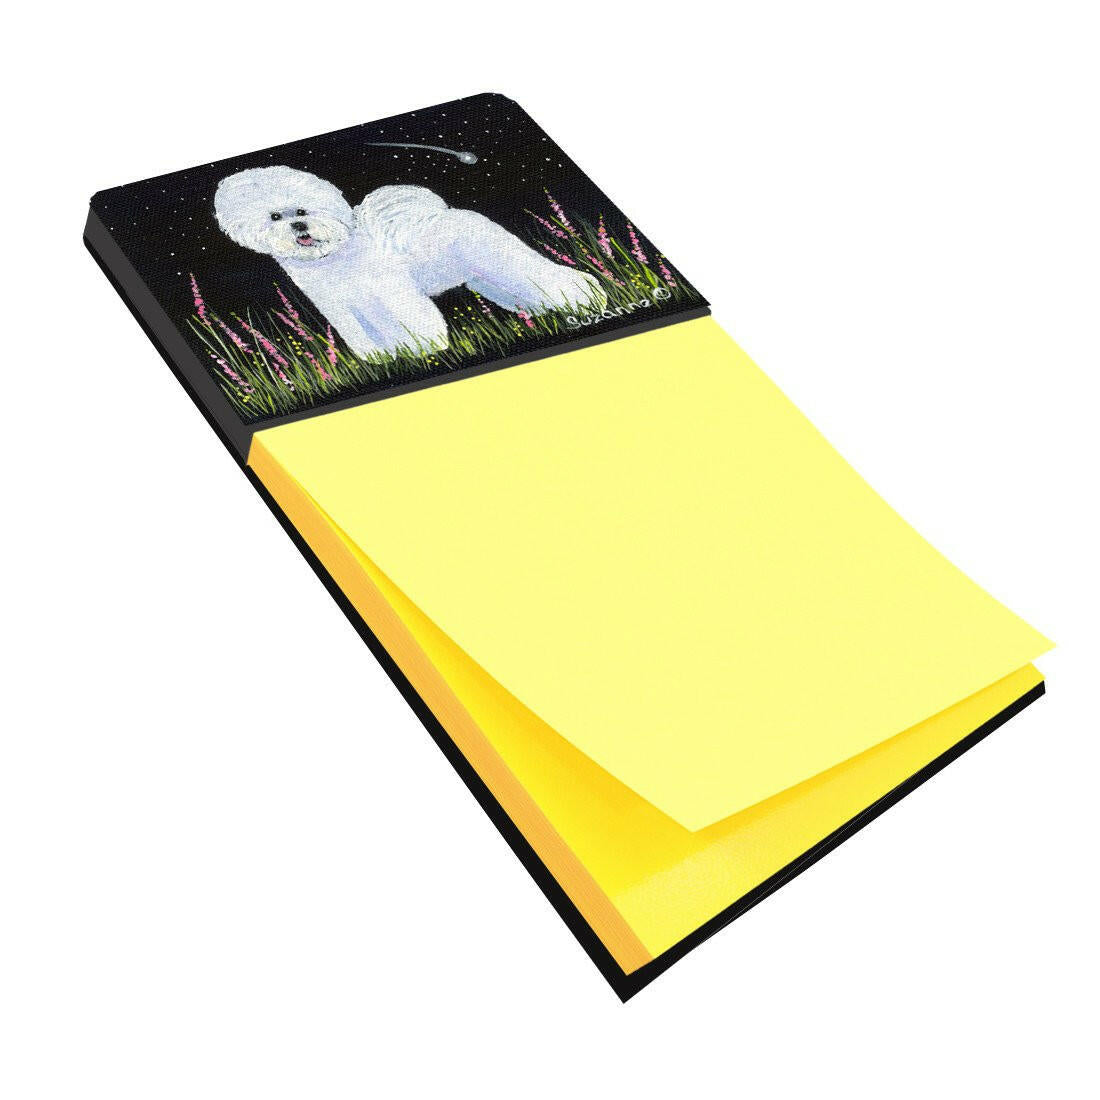 Bichon Frise Refiillable Sticky Note Holder or Postit Note Dispenser SS8143SN by Caroline's Treasures